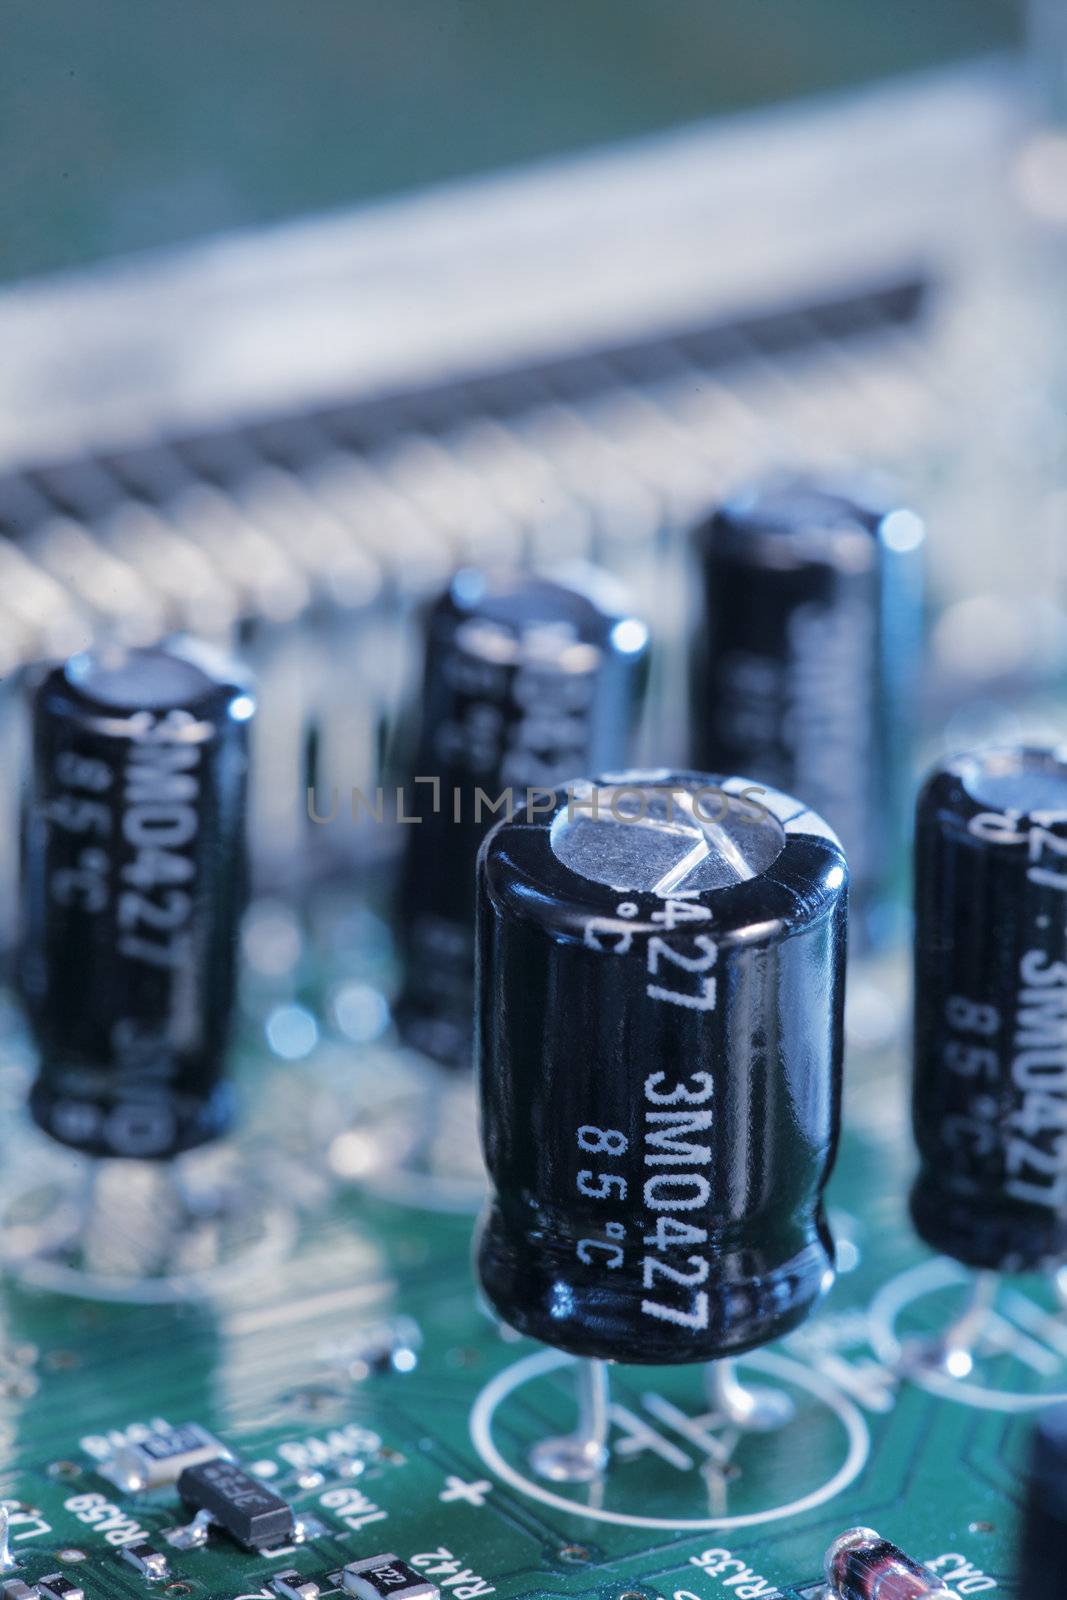 Capacitors by Stocksnapper